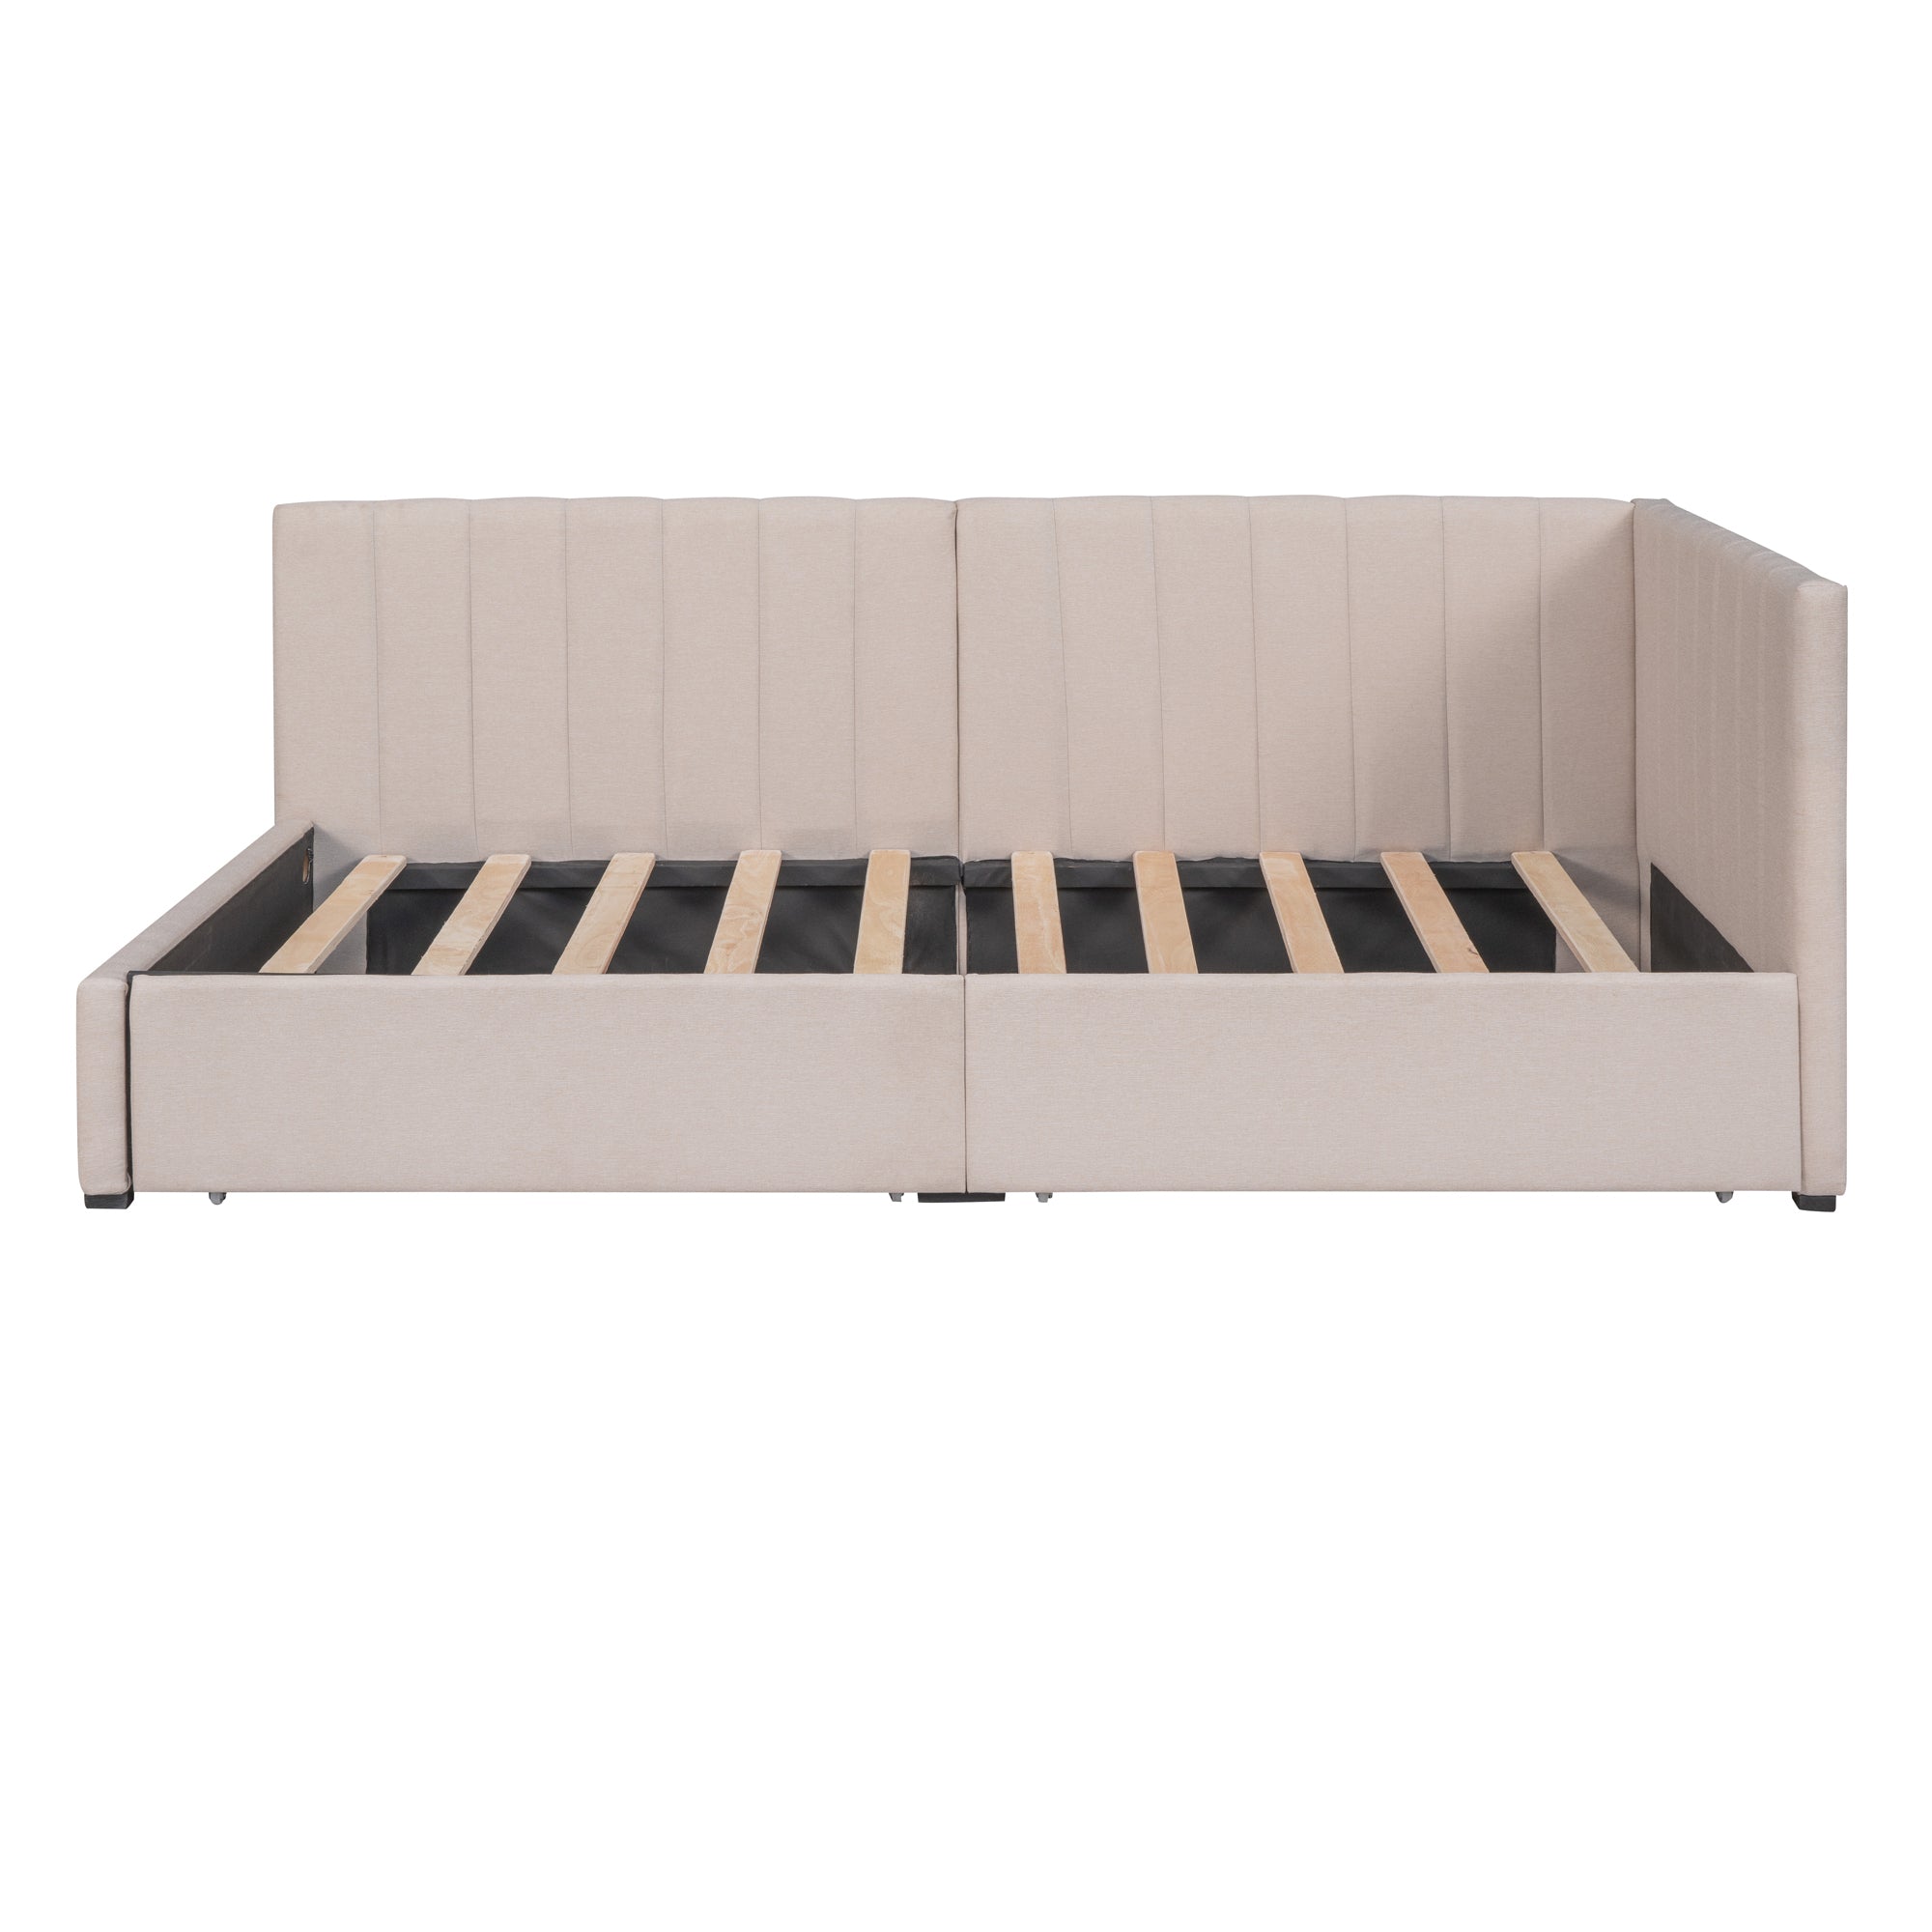 Upholstered Daybed with 2 Storage Drawers Twin Size beige-upholstered